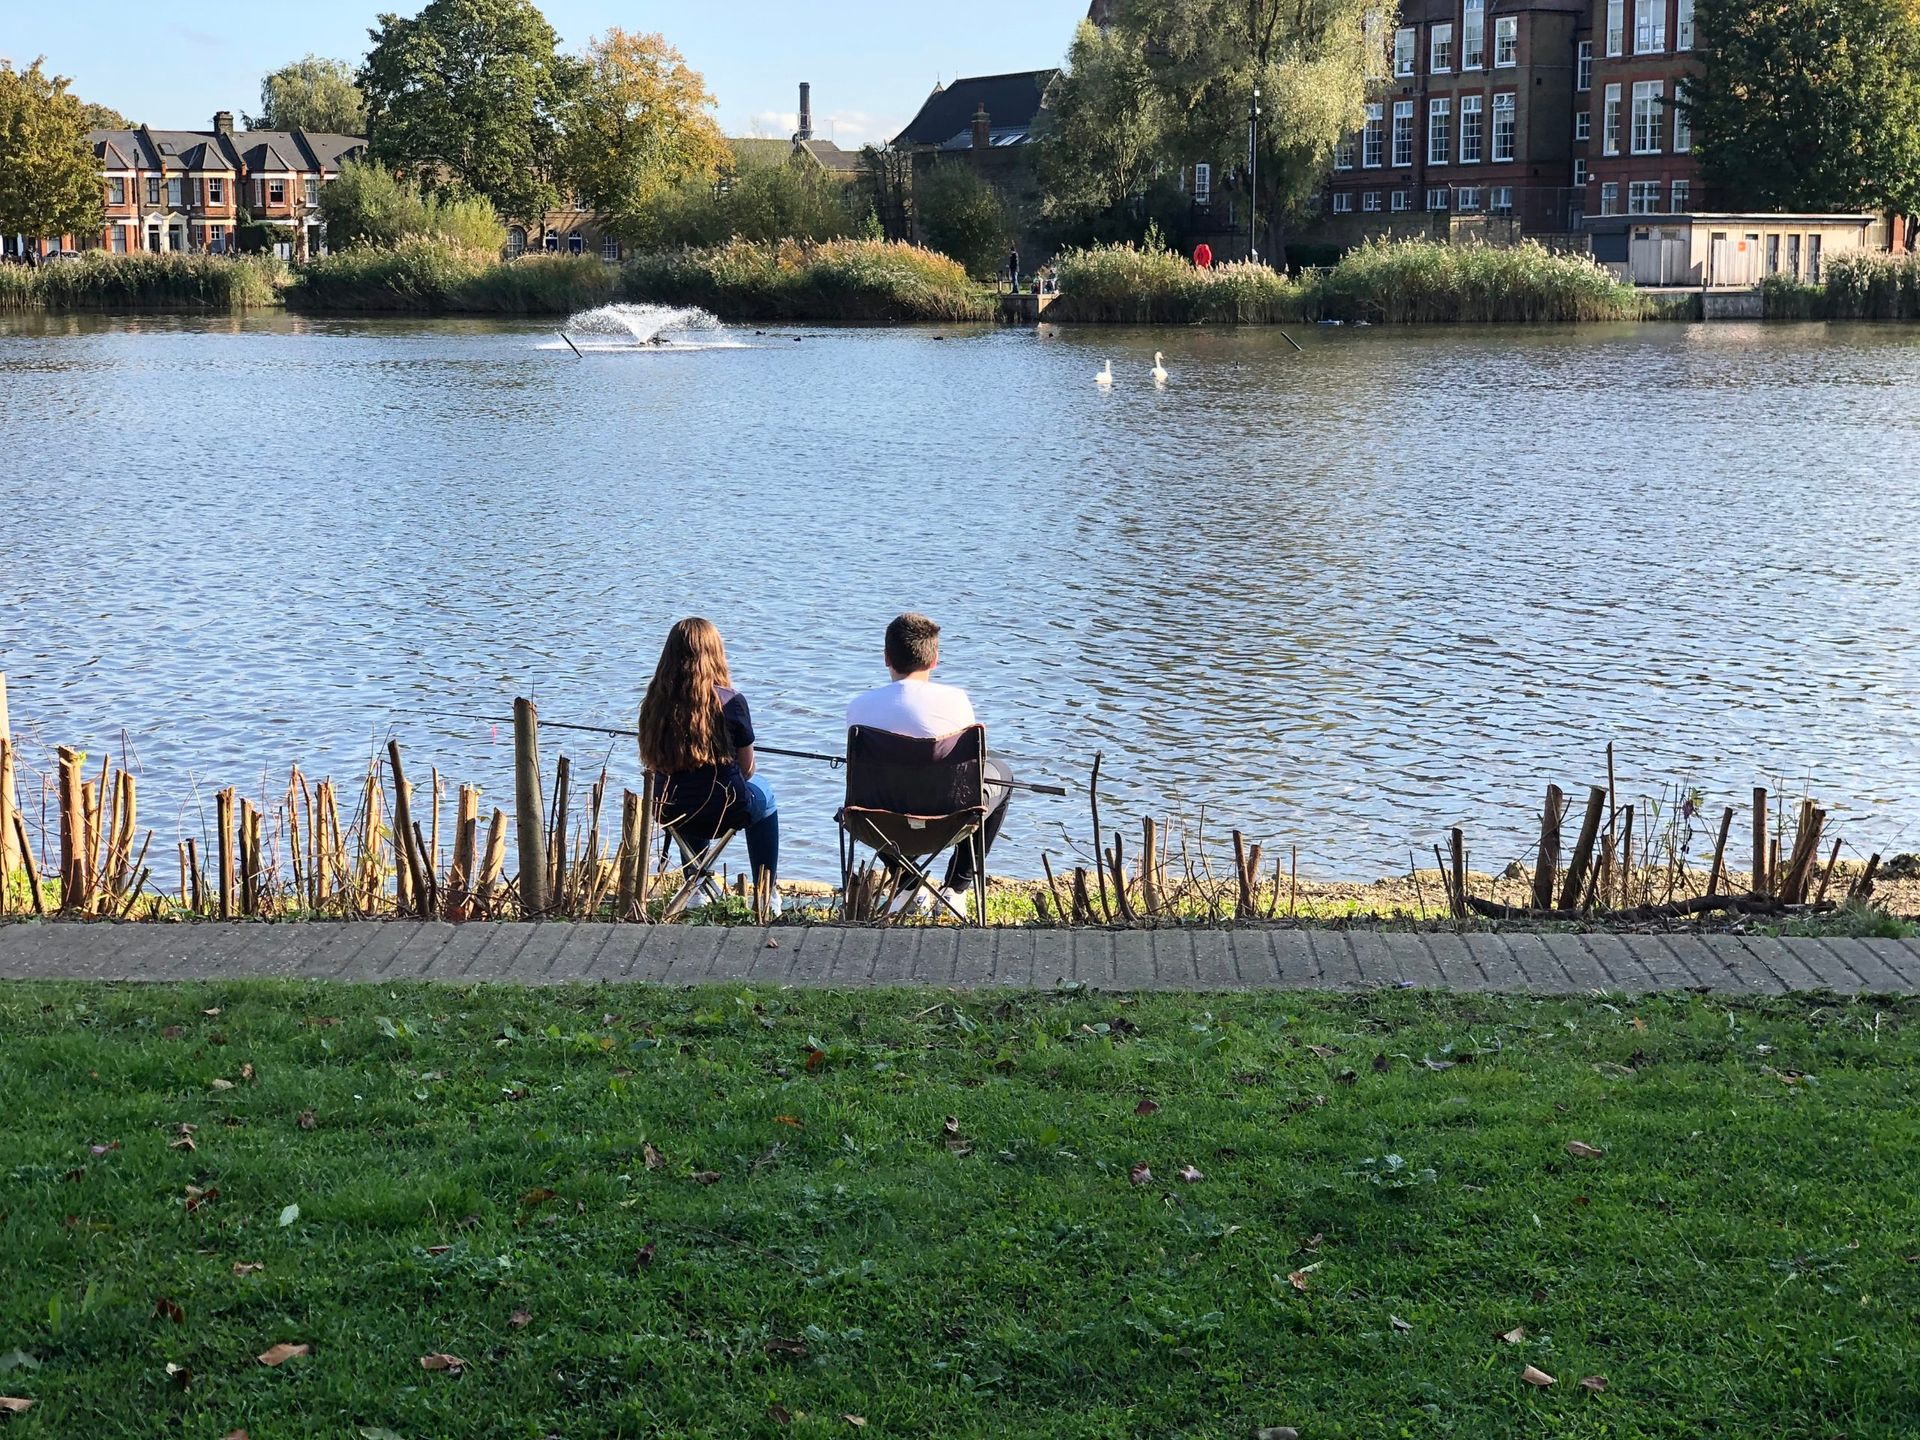 Two people fishing by a lake